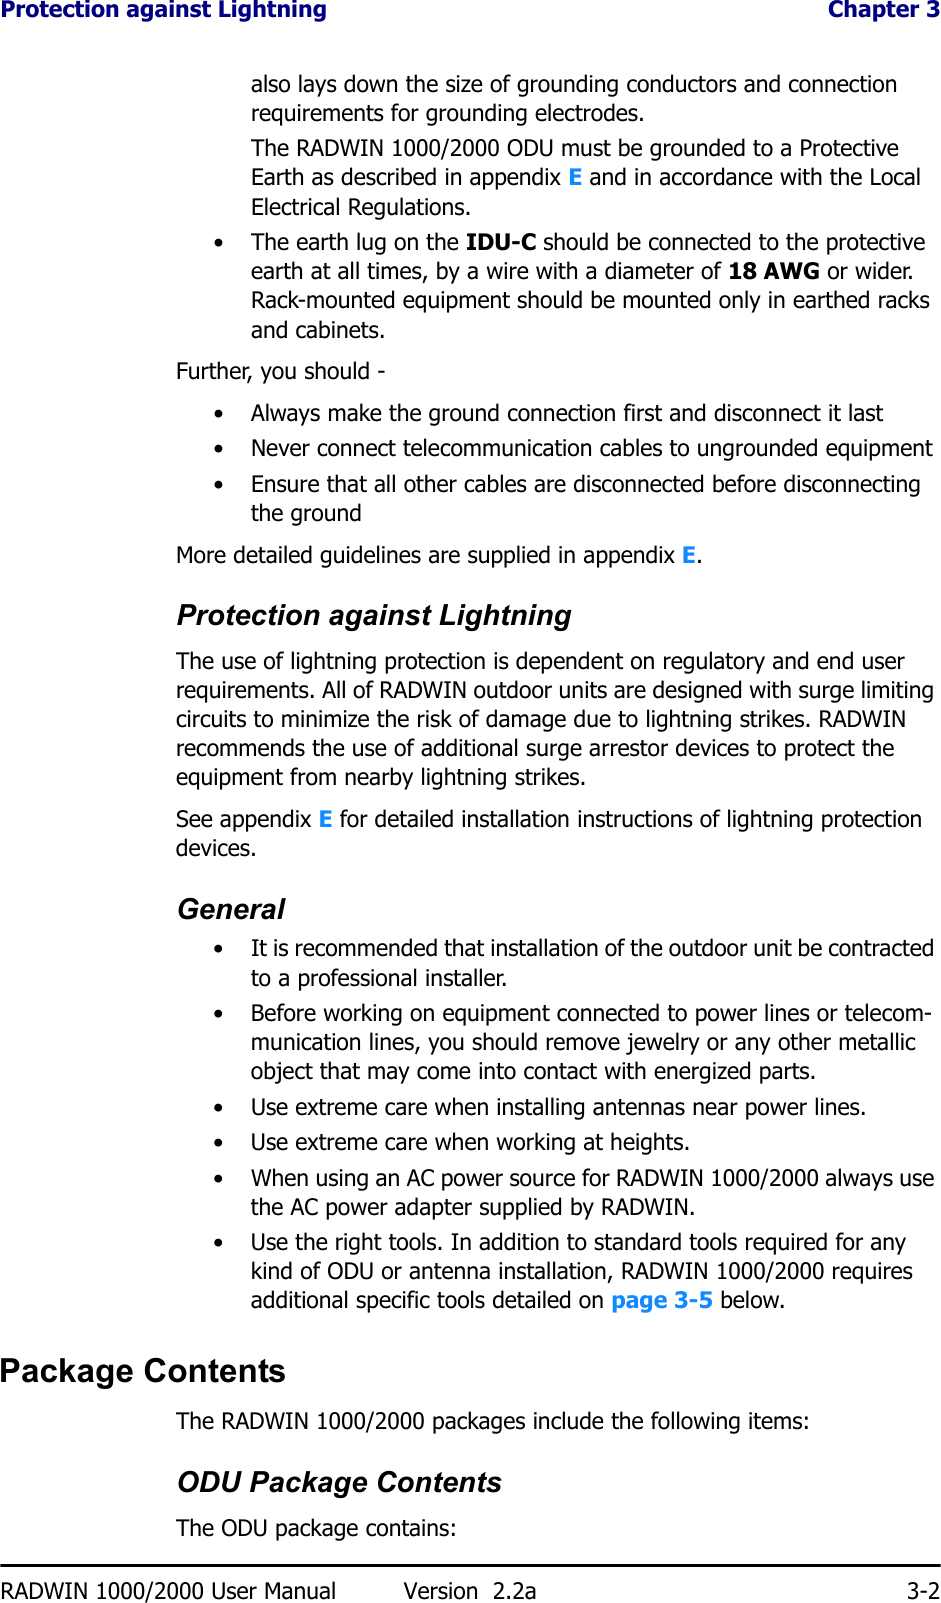 Protection against Lightning  Chapter 3RADWIN 1000/2000 User Manual Version  2.2a 3-2also lays down the size of grounding conductors and connection requirements for grounding electrodes.The RADWIN 1000/2000 ODU must be grounded to a Protective Earth as described in appendix E and in accordance with the Local Electrical Regulations.• The earth lug on the IDU-C should be connected to the protective earth at all times, by a wire with a diameter of 18 AWG or wider. Rack-mounted equipment should be mounted only in earthed racks and cabinets.Further, you should -• Always make the ground connection first and disconnect it last• Never connect telecommunication cables to ungrounded equipment• Ensure that all other cables are disconnected before disconnecting the groundMore detailed guidelines are supplied in appendix E.Protection against LightningThe use of lightning protection is dependent on regulatory and end user requirements. All of RADWIN outdoor units are designed with surge limiting circuits to minimize the risk of damage due to lightning strikes. RADWIN recommends the use of additional surge arrestor devices to protect the equipment from nearby lightning strikes.See appendix E for detailed installation instructions of lightning protection devices.General• It is recommended that installation of the outdoor unit be contracted to a professional installer.• Before working on equipment connected to power lines or telecom-munication lines, you should remove jewelry or any other metallic object that may come into contact with energized parts.• Use extreme care when installing antennas near power lines.• Use extreme care when working at heights.• When using an AC power source for RADWIN 1000/2000 always use the AC power adapter supplied by RADWIN.• Use the right tools. In addition to standard tools required for any kind of ODU or antenna installation, RADWIN 1000/2000 requires additional specific tools detailed on page 3-5 below.Package ContentsThe RADWIN 1000/2000 packages include the following items:ODU Package ContentsThe ODU package contains: